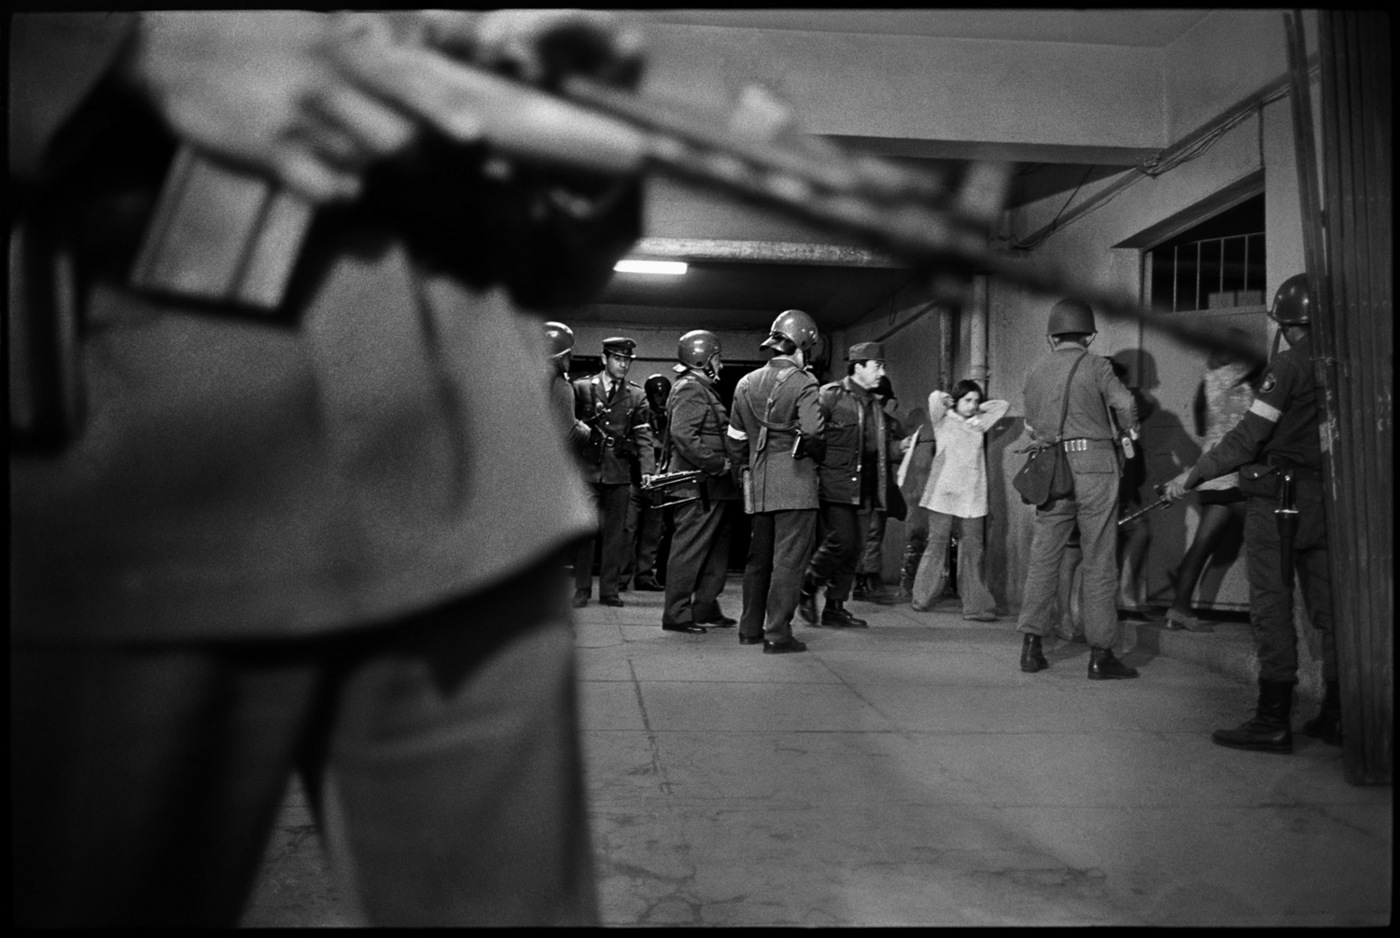 Prisoners are brought to the National Stadium for processing, and interrogation. : Chile: 40 Years After the Coup d'Etat : David Burnett | Photographer